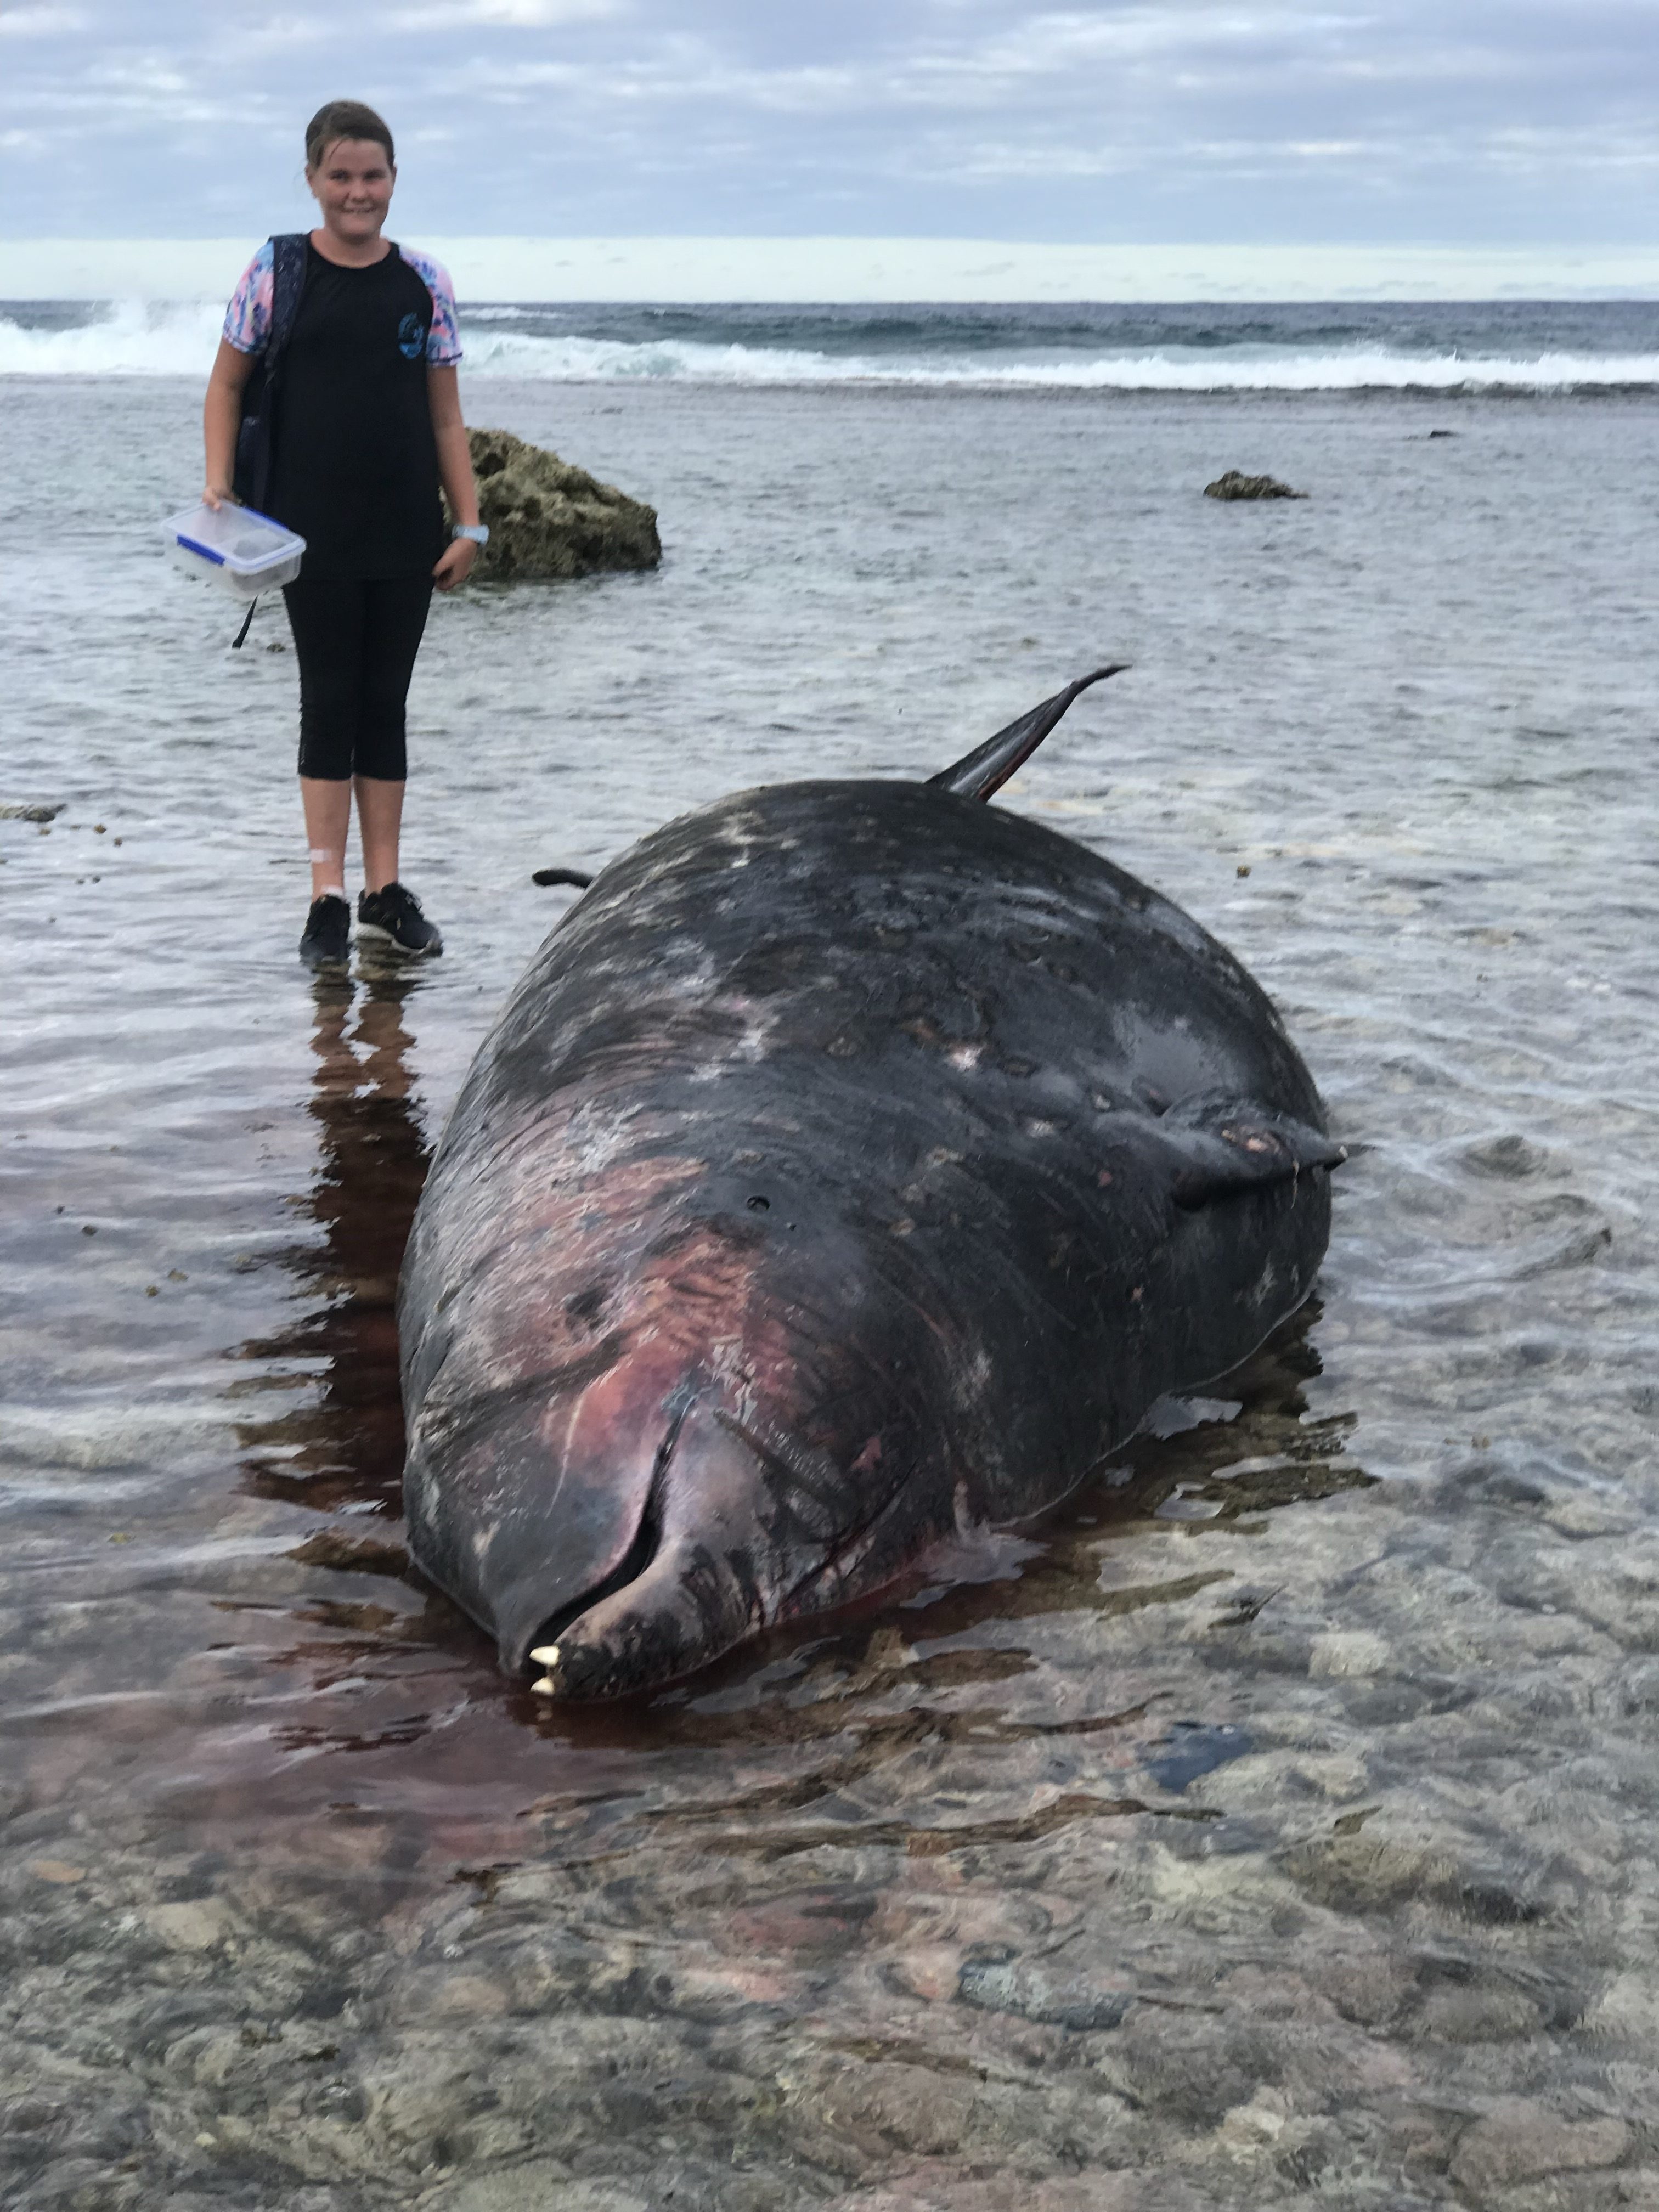 Volunteer Next to Beached Whale